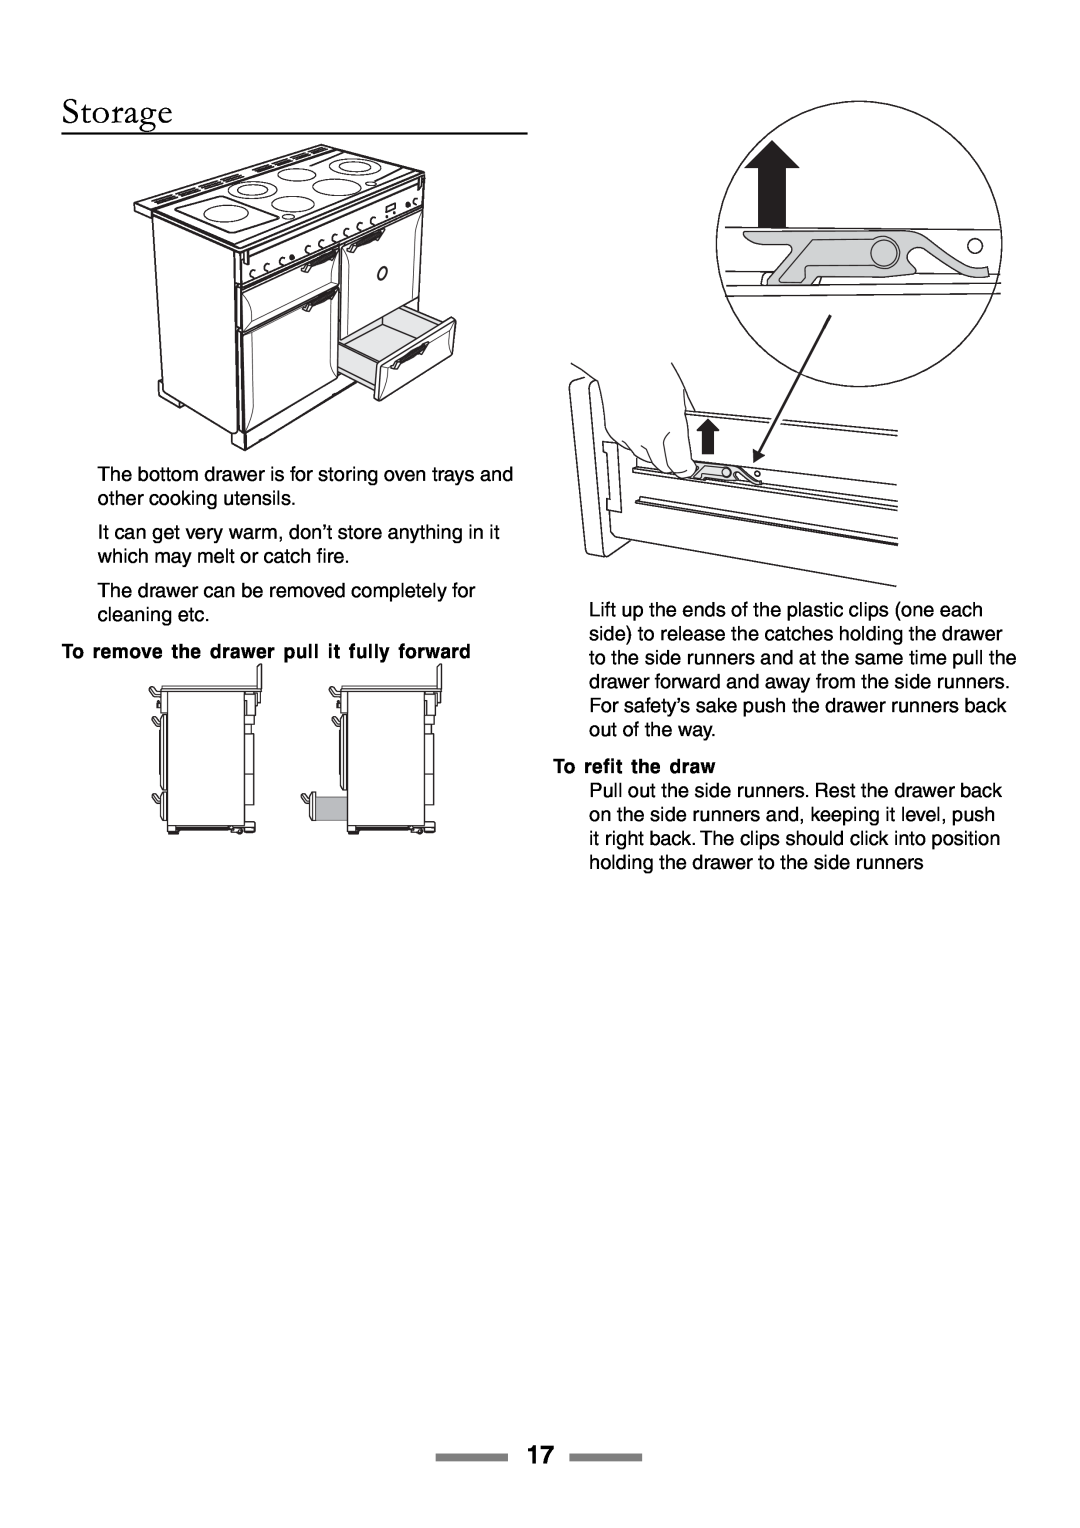 Rangemaster U105510-01 manual Storage, To remove the drawer pull it fully forward, To refit the draw 